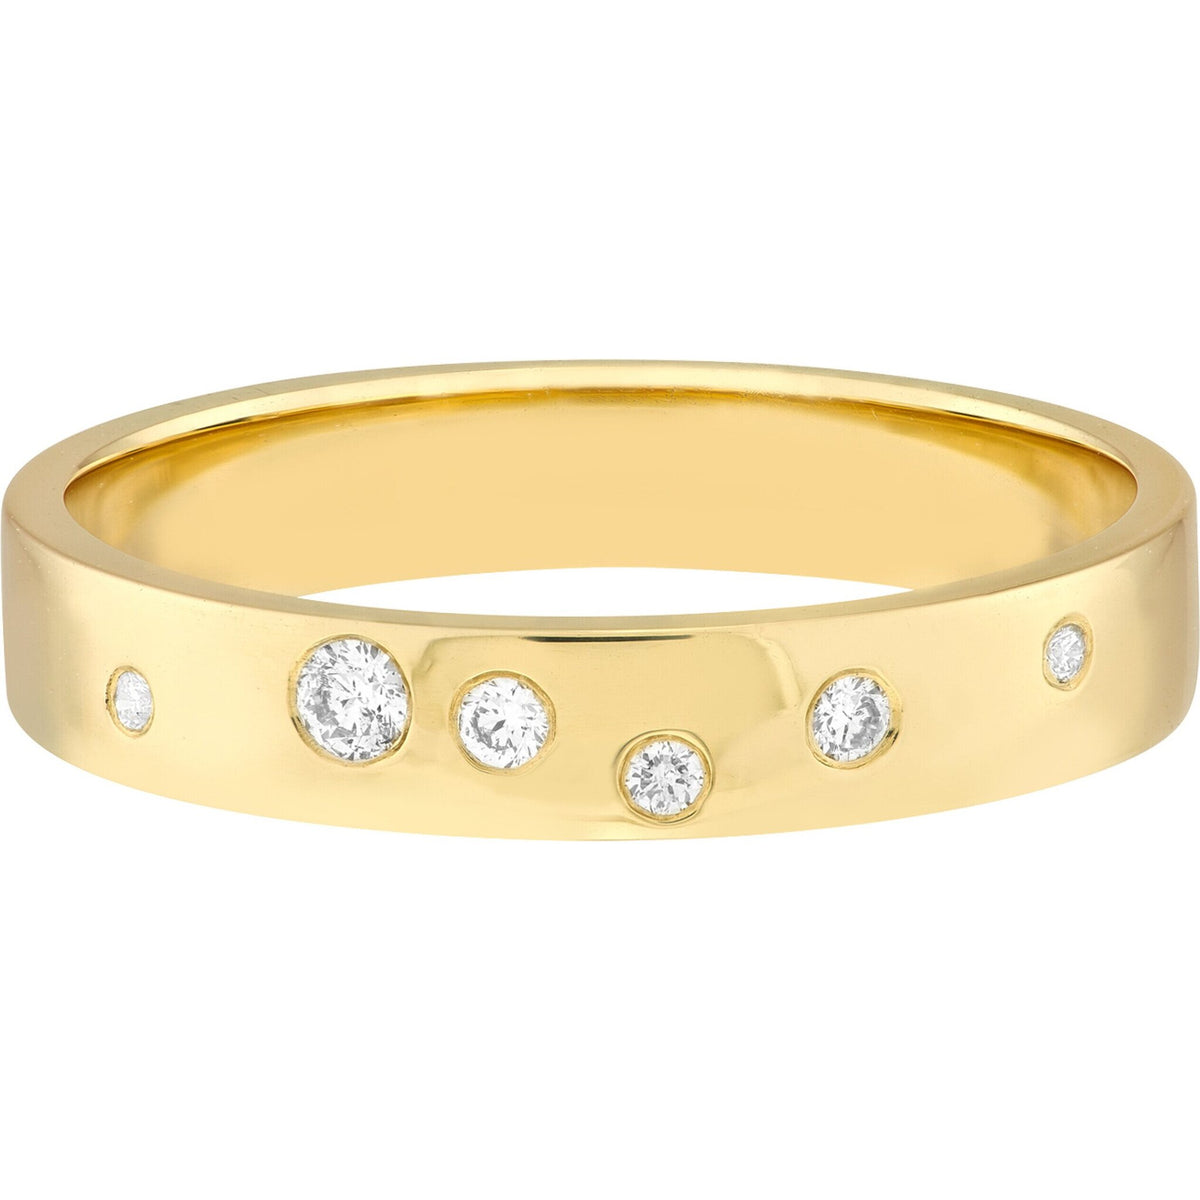 Olas d'Oro 6" Ring - 14K Yellow Gold Scattered Diamond Polished Band